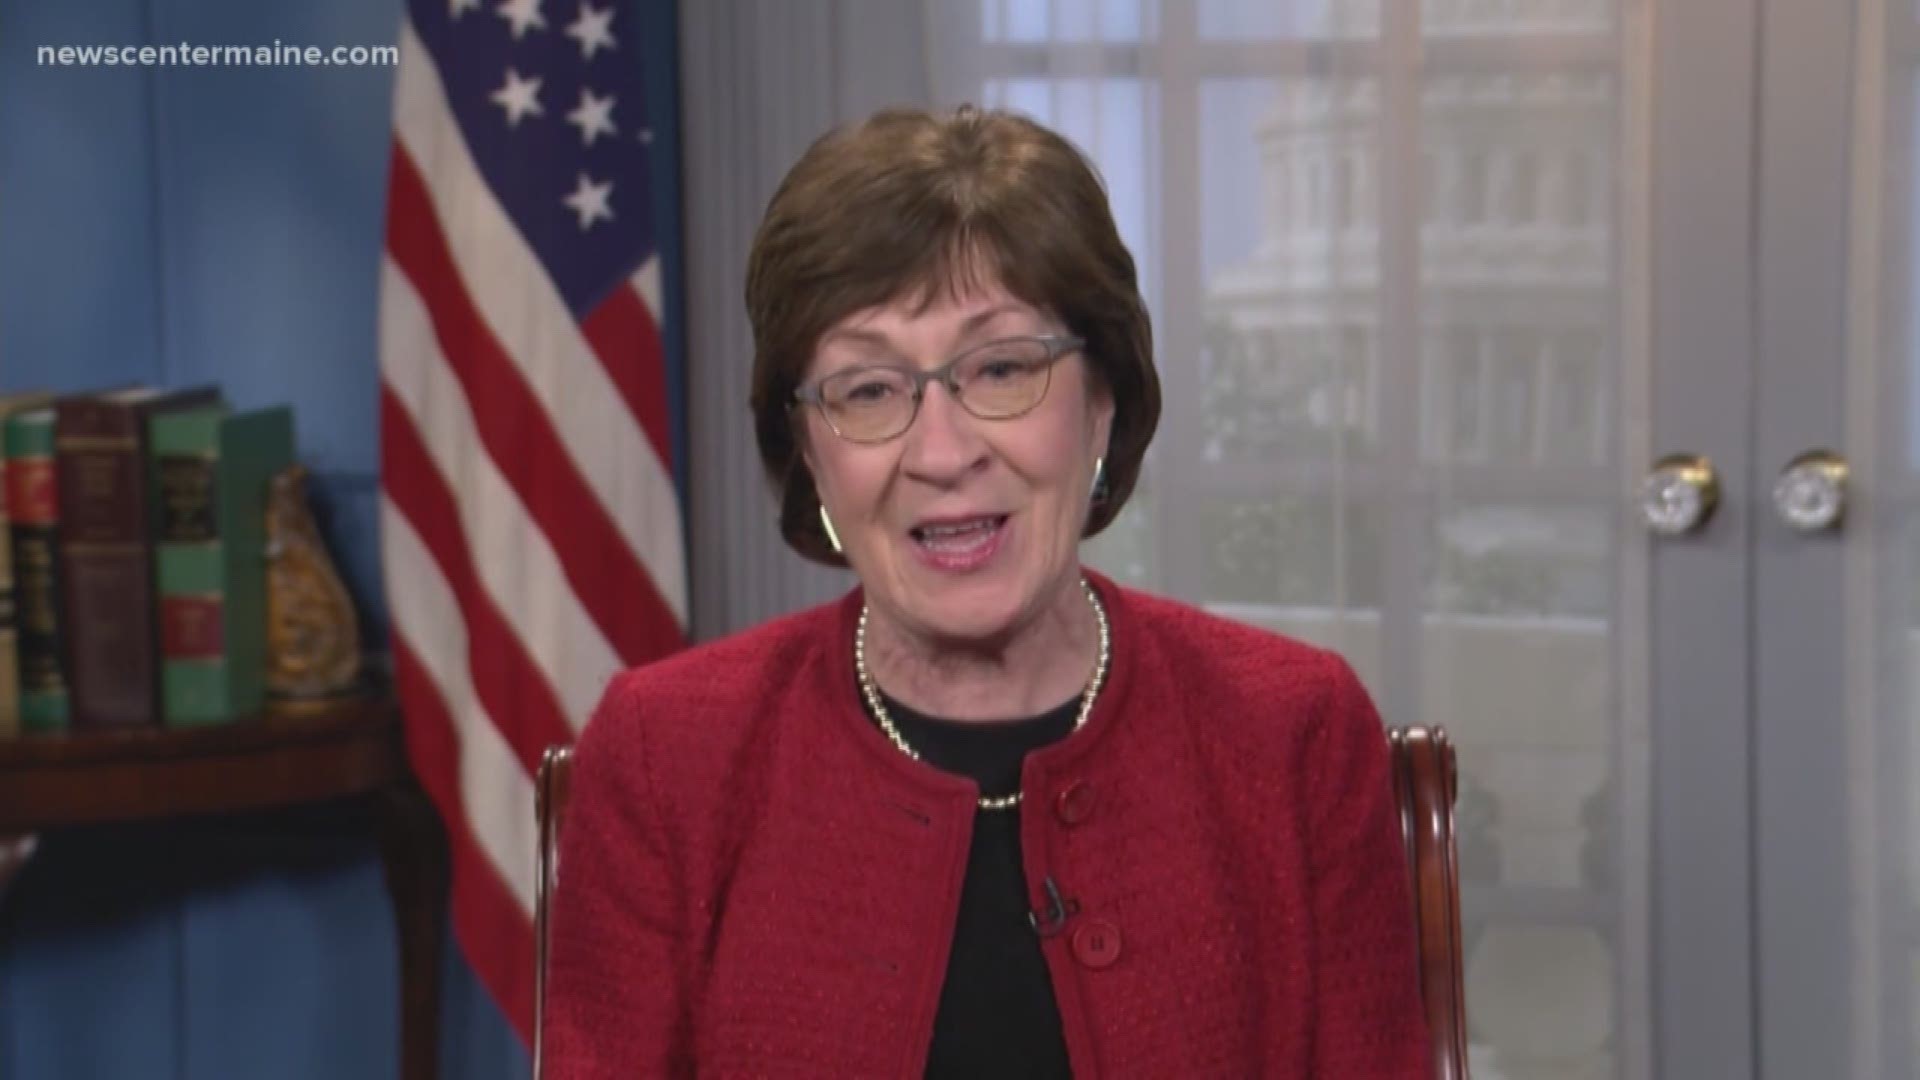 Sen. Susan Collins says she would like Congress to fix flaws in the Affordable Care Act, but does not agree with a decision to completely overturn it.